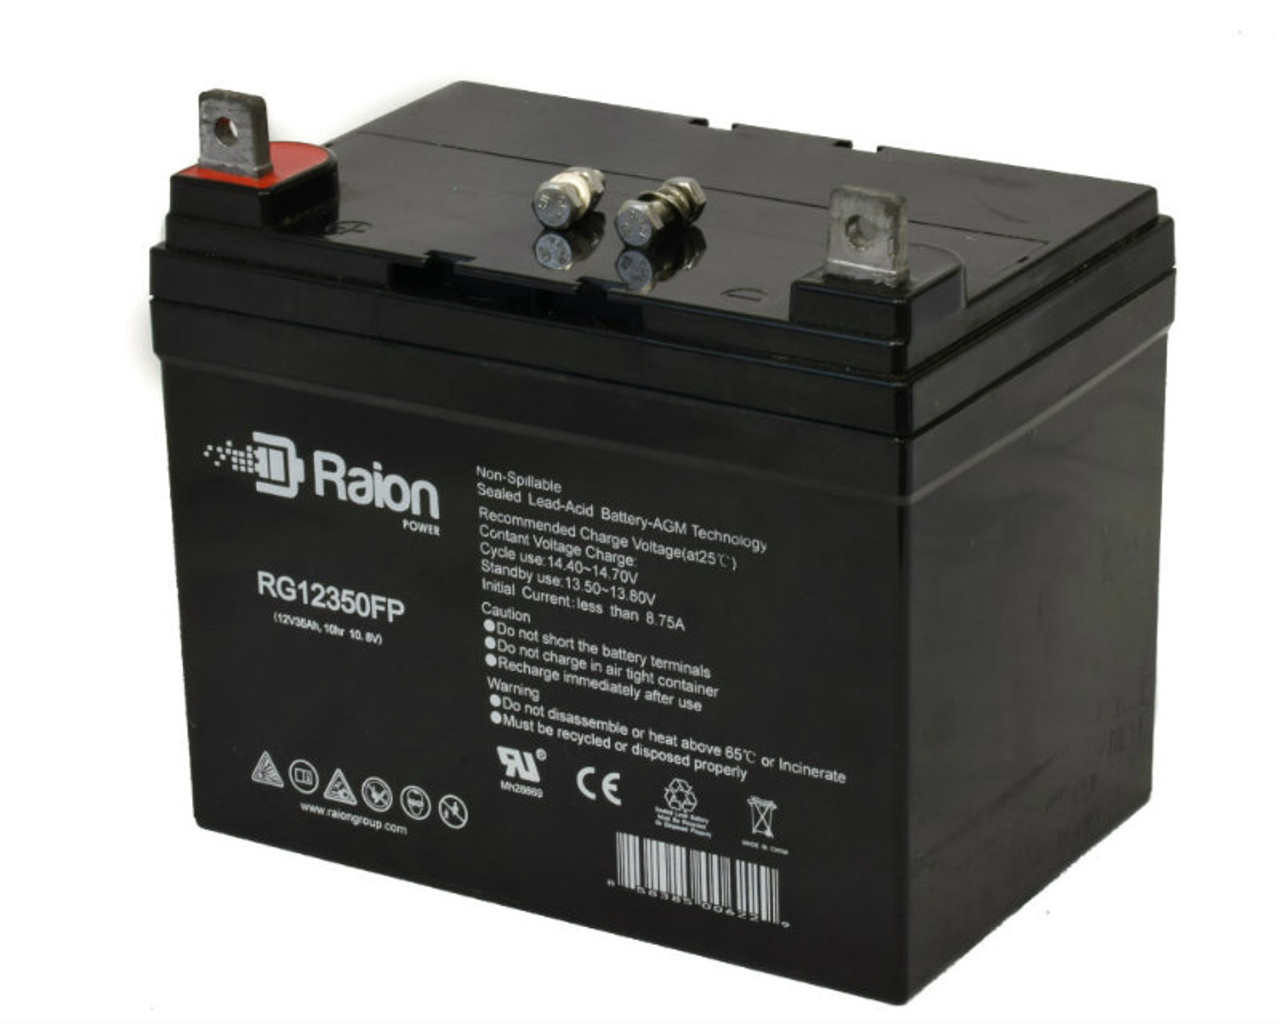 Raion Power Replacement 12V 35Ah Battery for Ohio 3300 Infant Warmer Auxiliary - 1 Pack